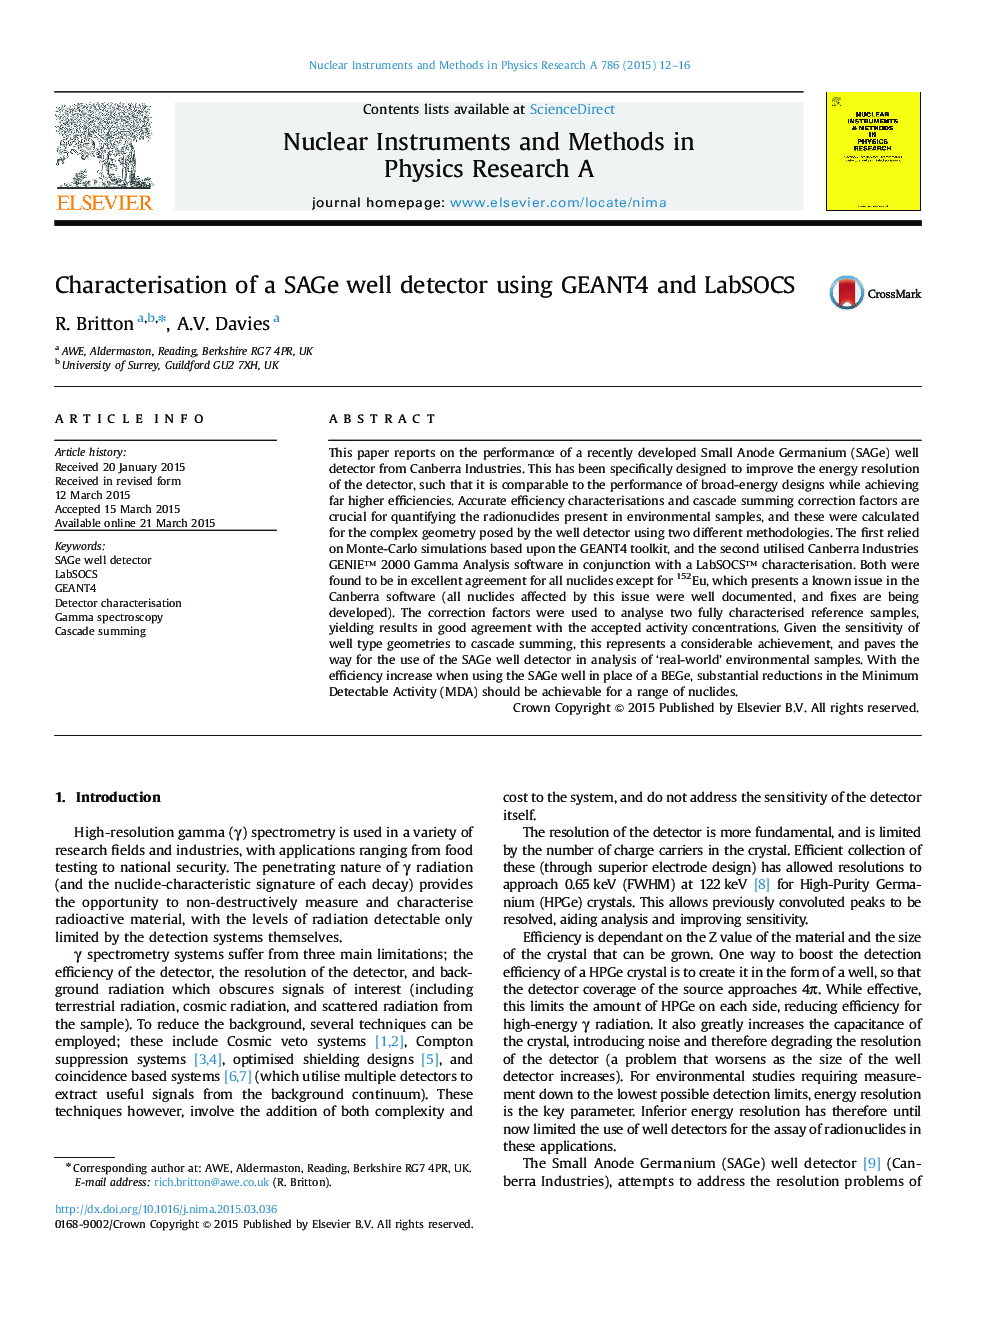 Characterisation of a SAGe well detector using GEANT4 and LabSOCS